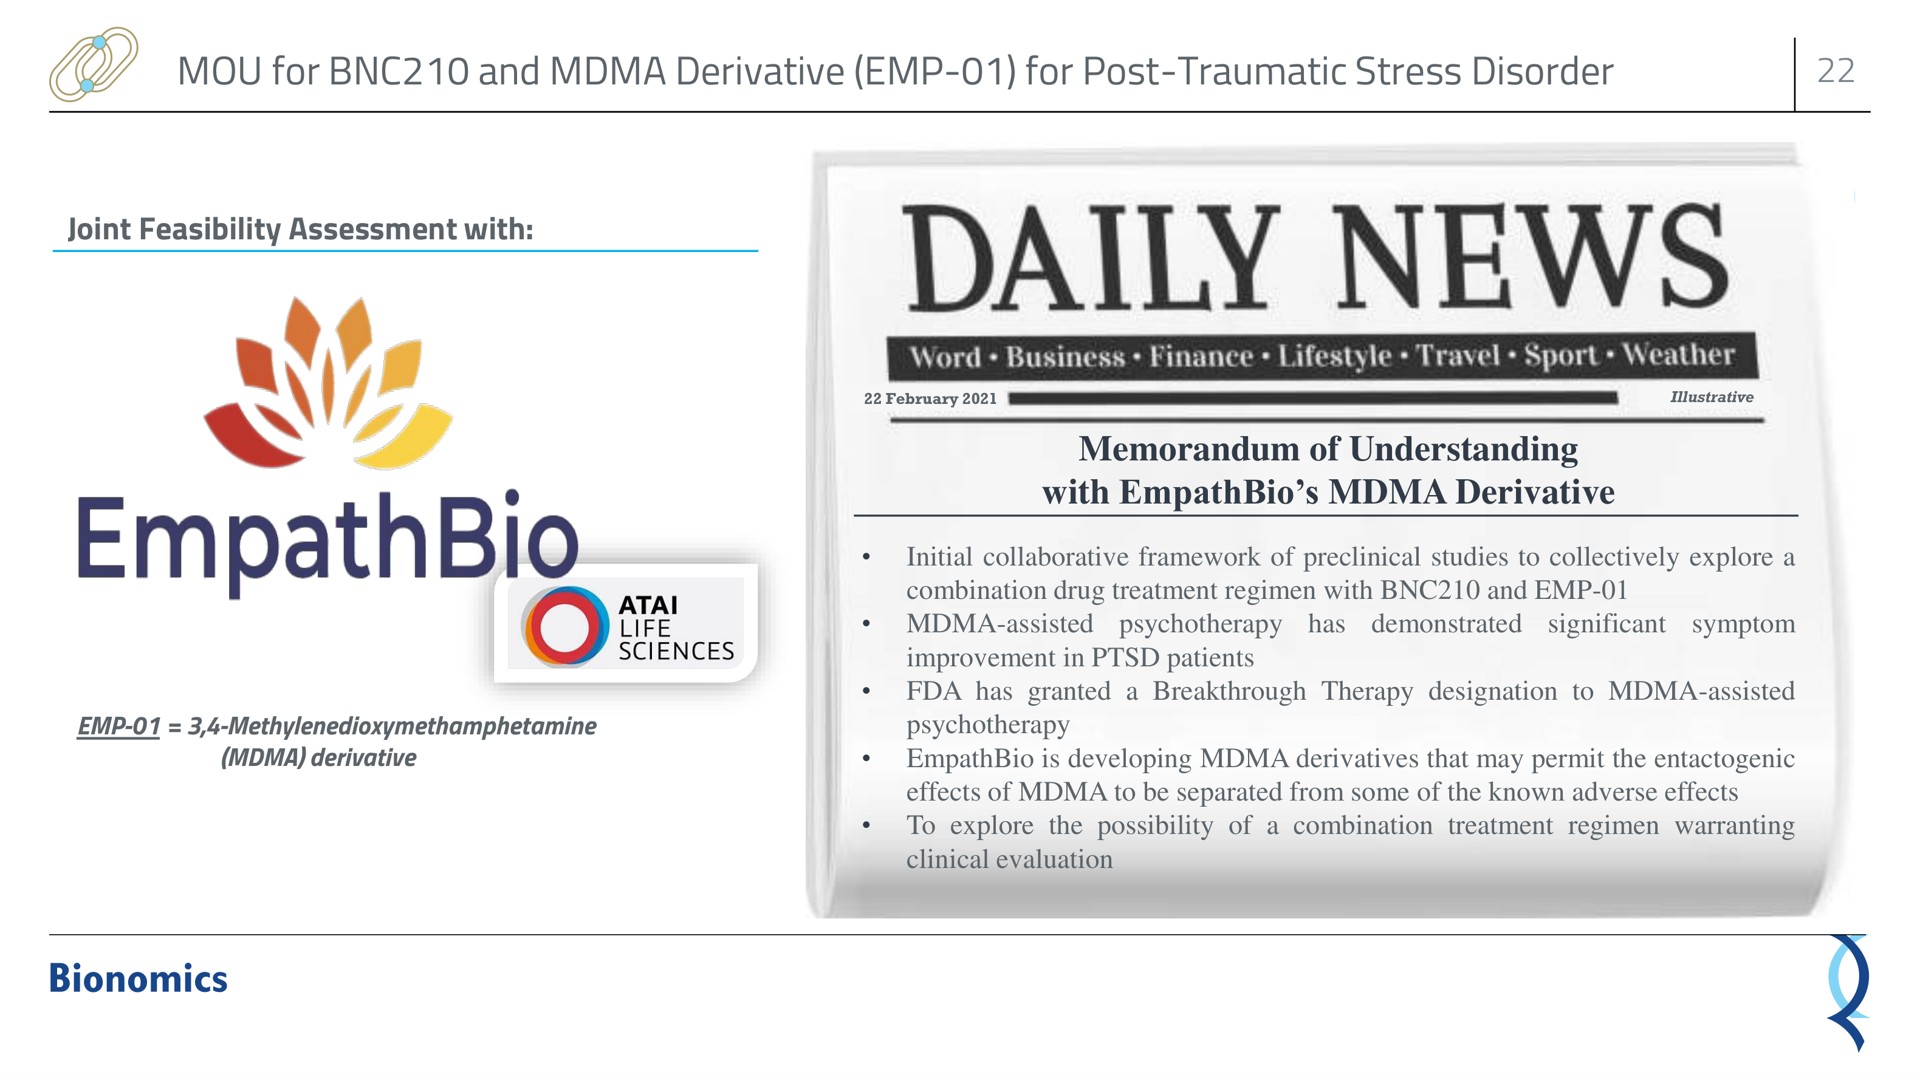 mou for and derivative for post traumatic stress disorder memorandum of understanding with derivative daily news | Bionomics